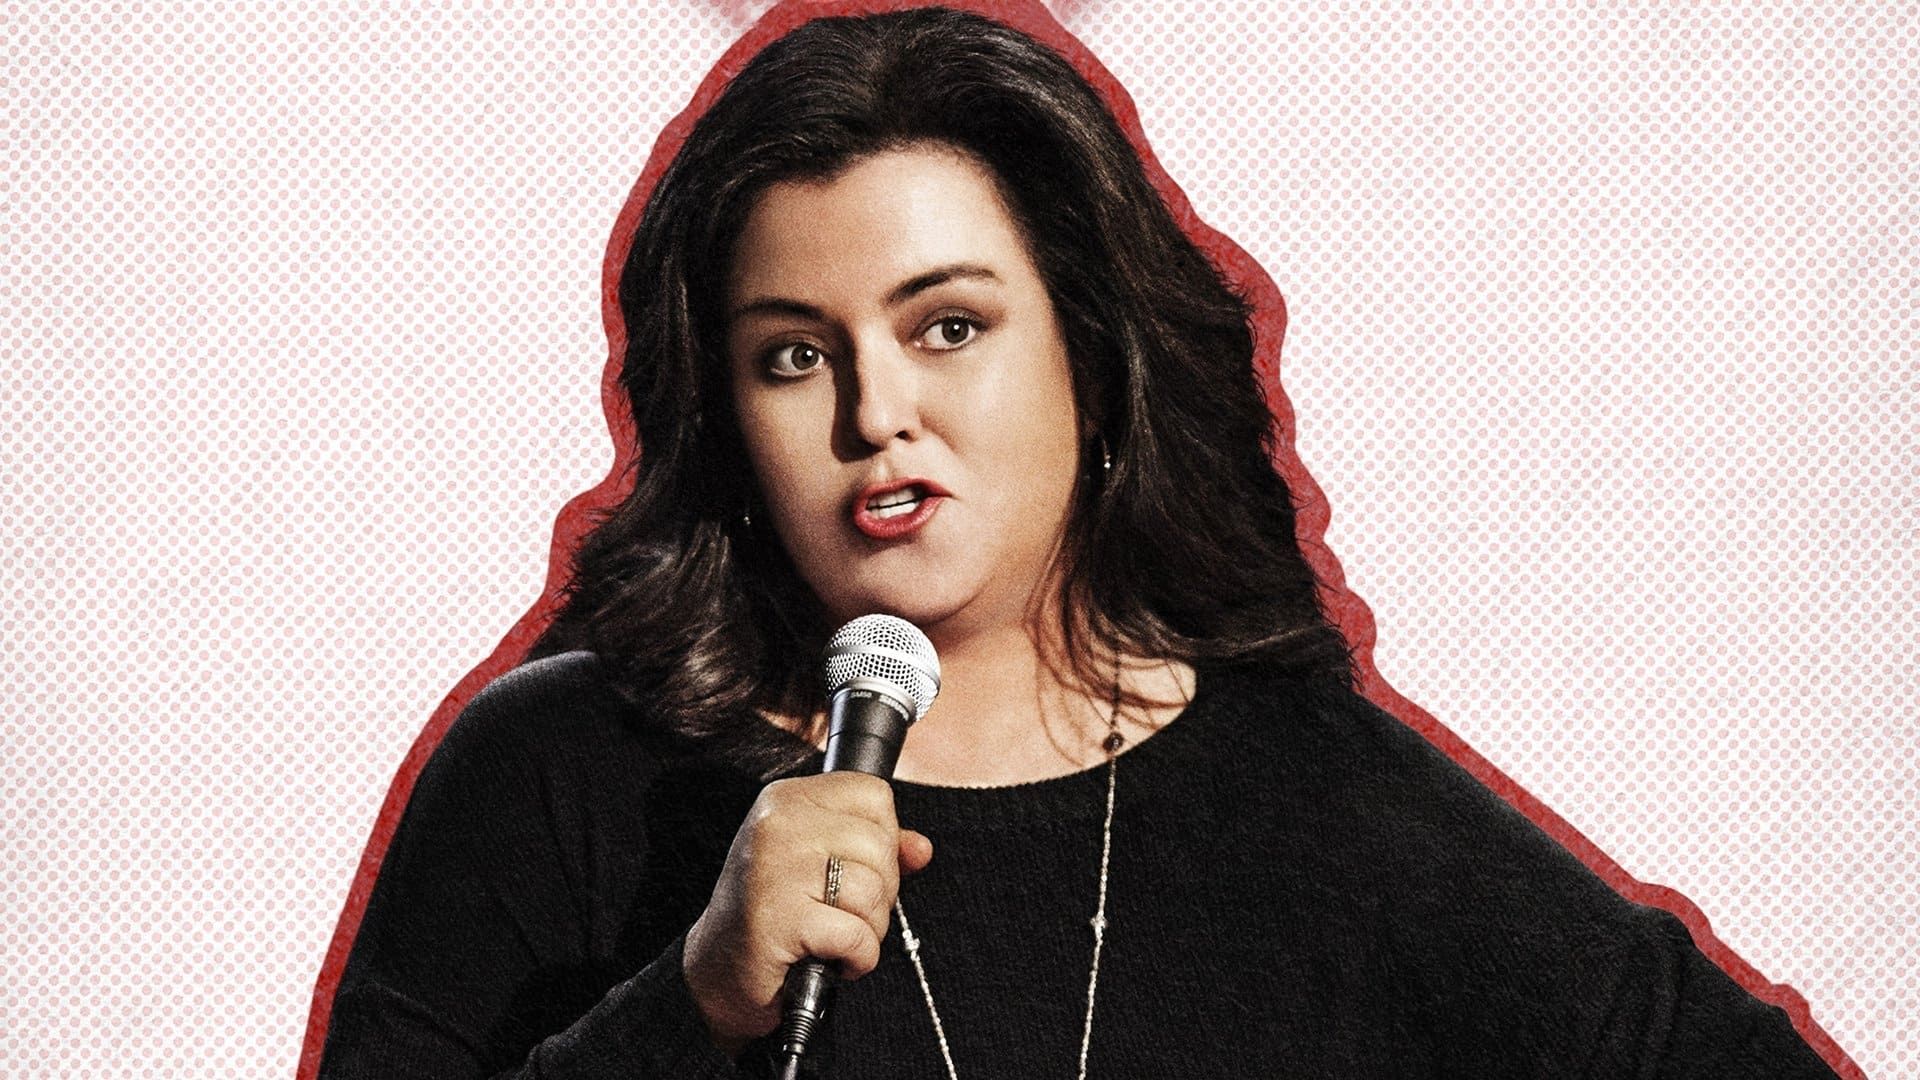 Rosie O'Donnell: A Heartfelt Stand Up background